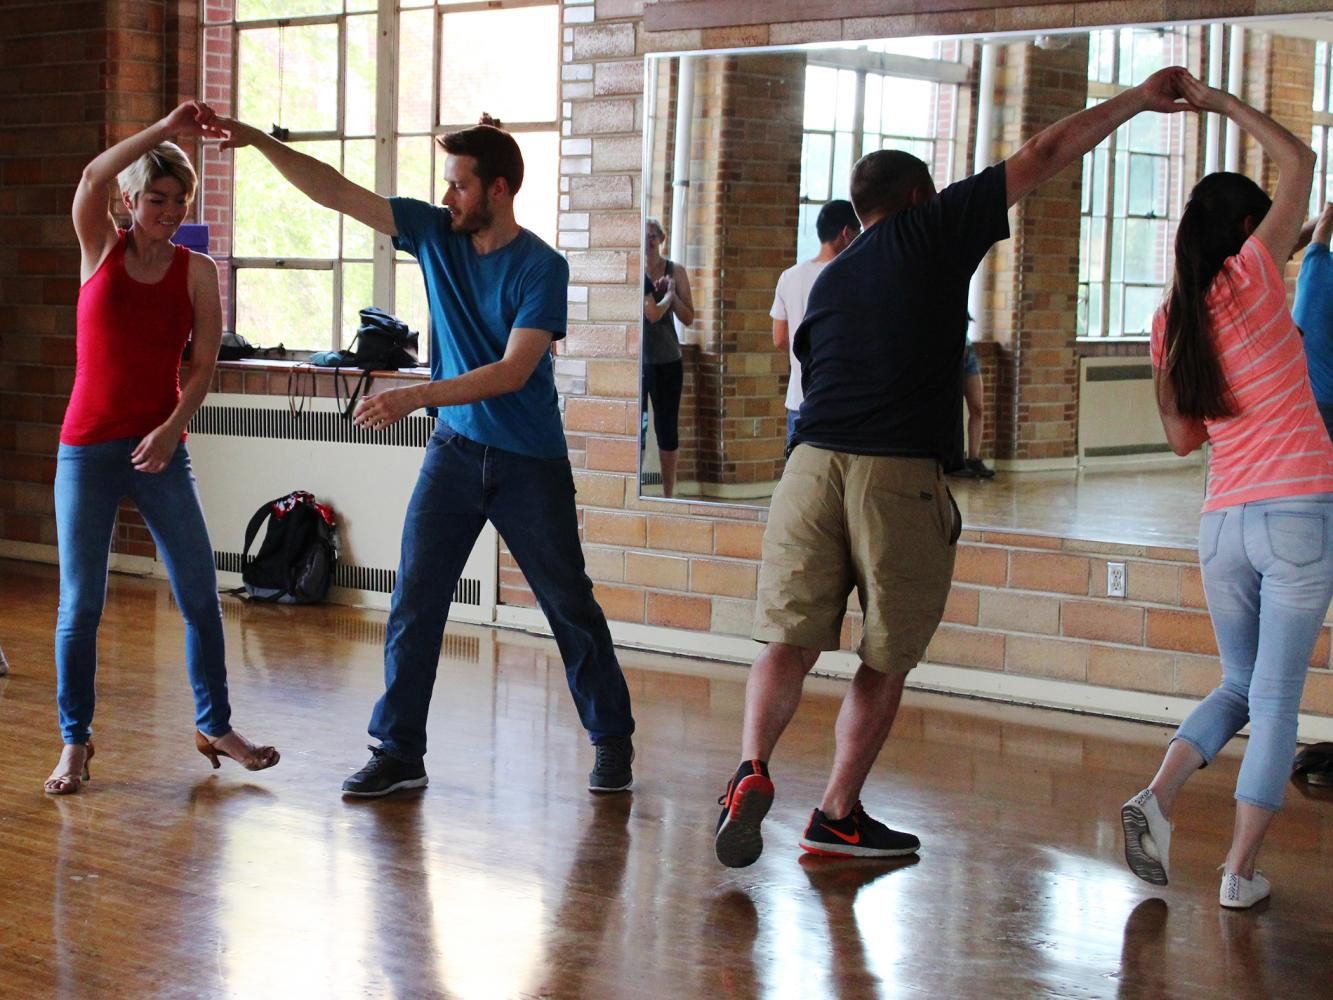 Latin Dance Club began last year. The club aims to bring WSU students authentic Latin dances including salsa and bachata.